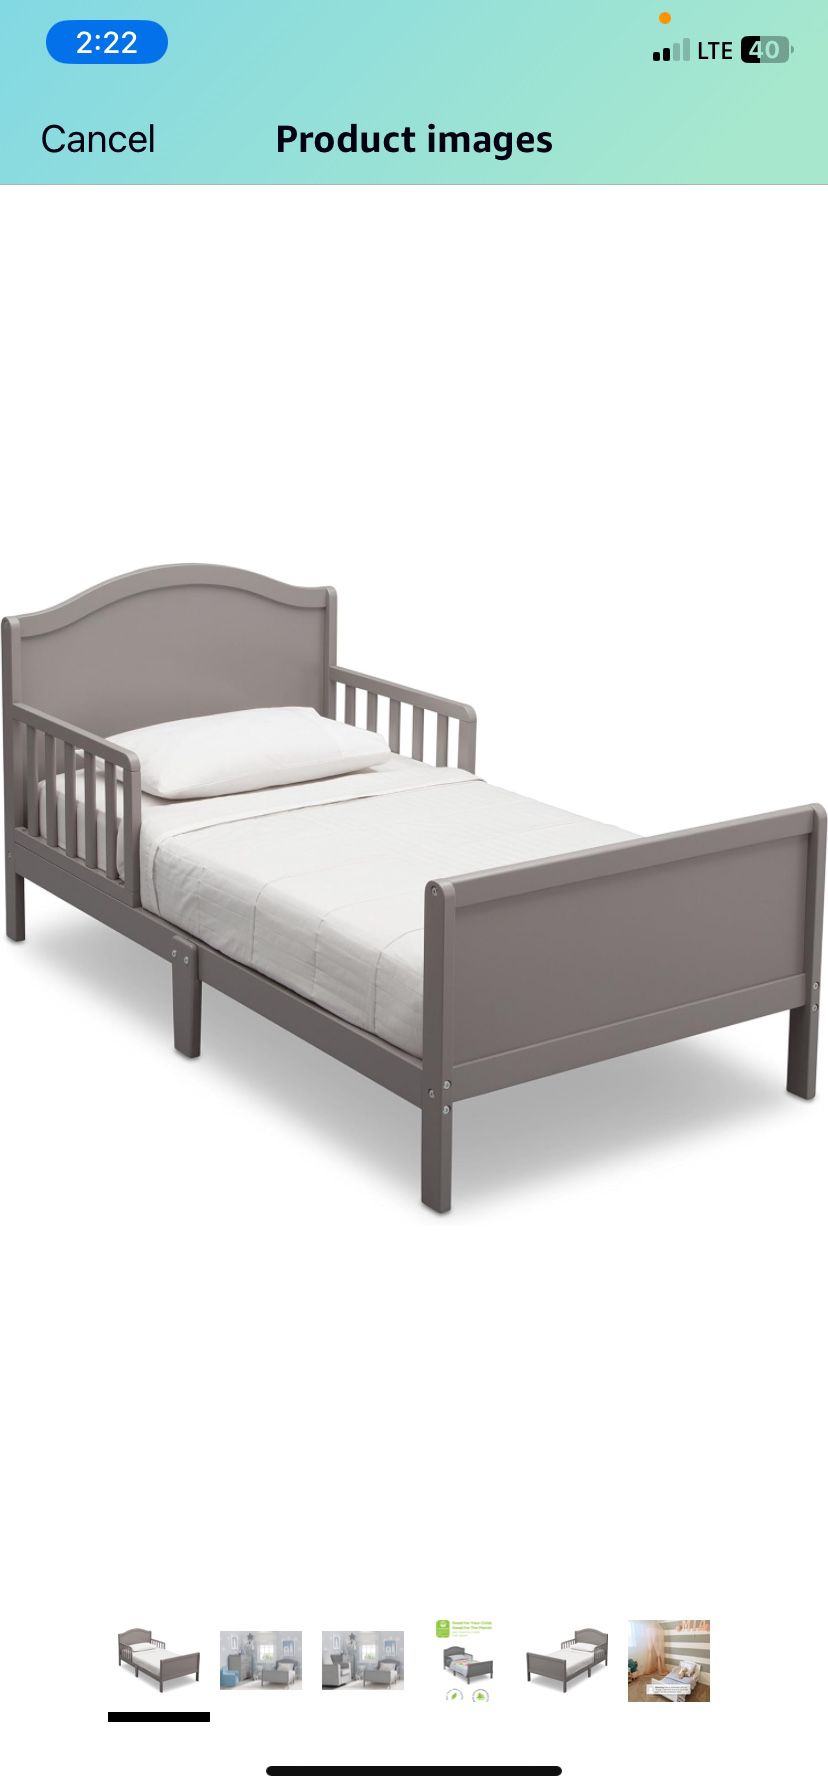 Toddler Bed For Sale 1 For $60 2 For $100